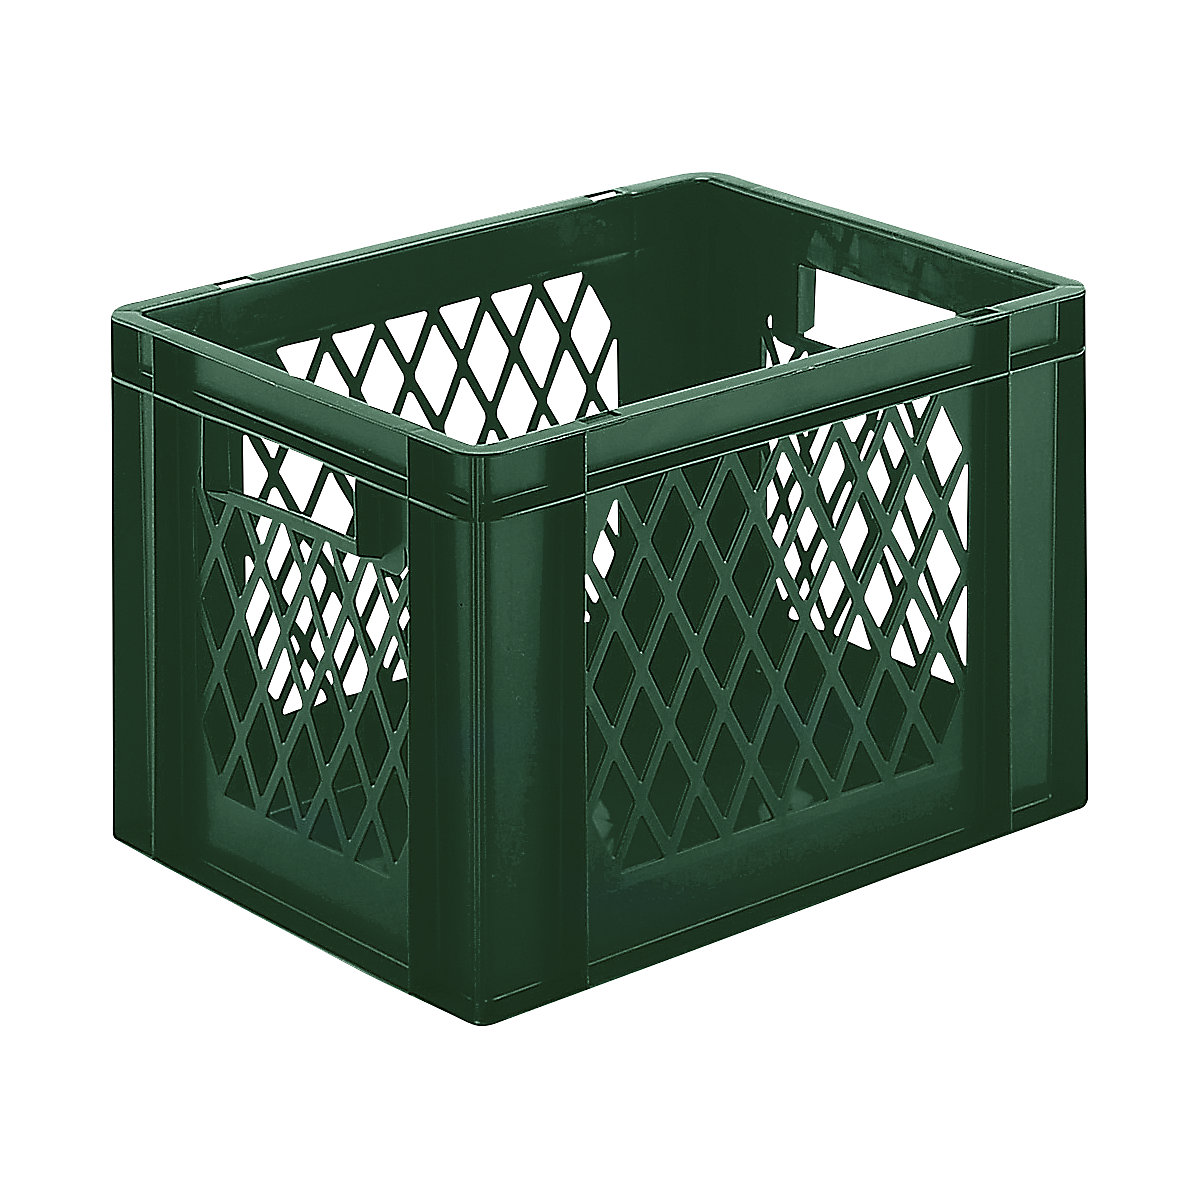 Euro stacking container, perforated walls, closed base, LxWxH 400 x 300 x 266 mm, green, pack of 5-6